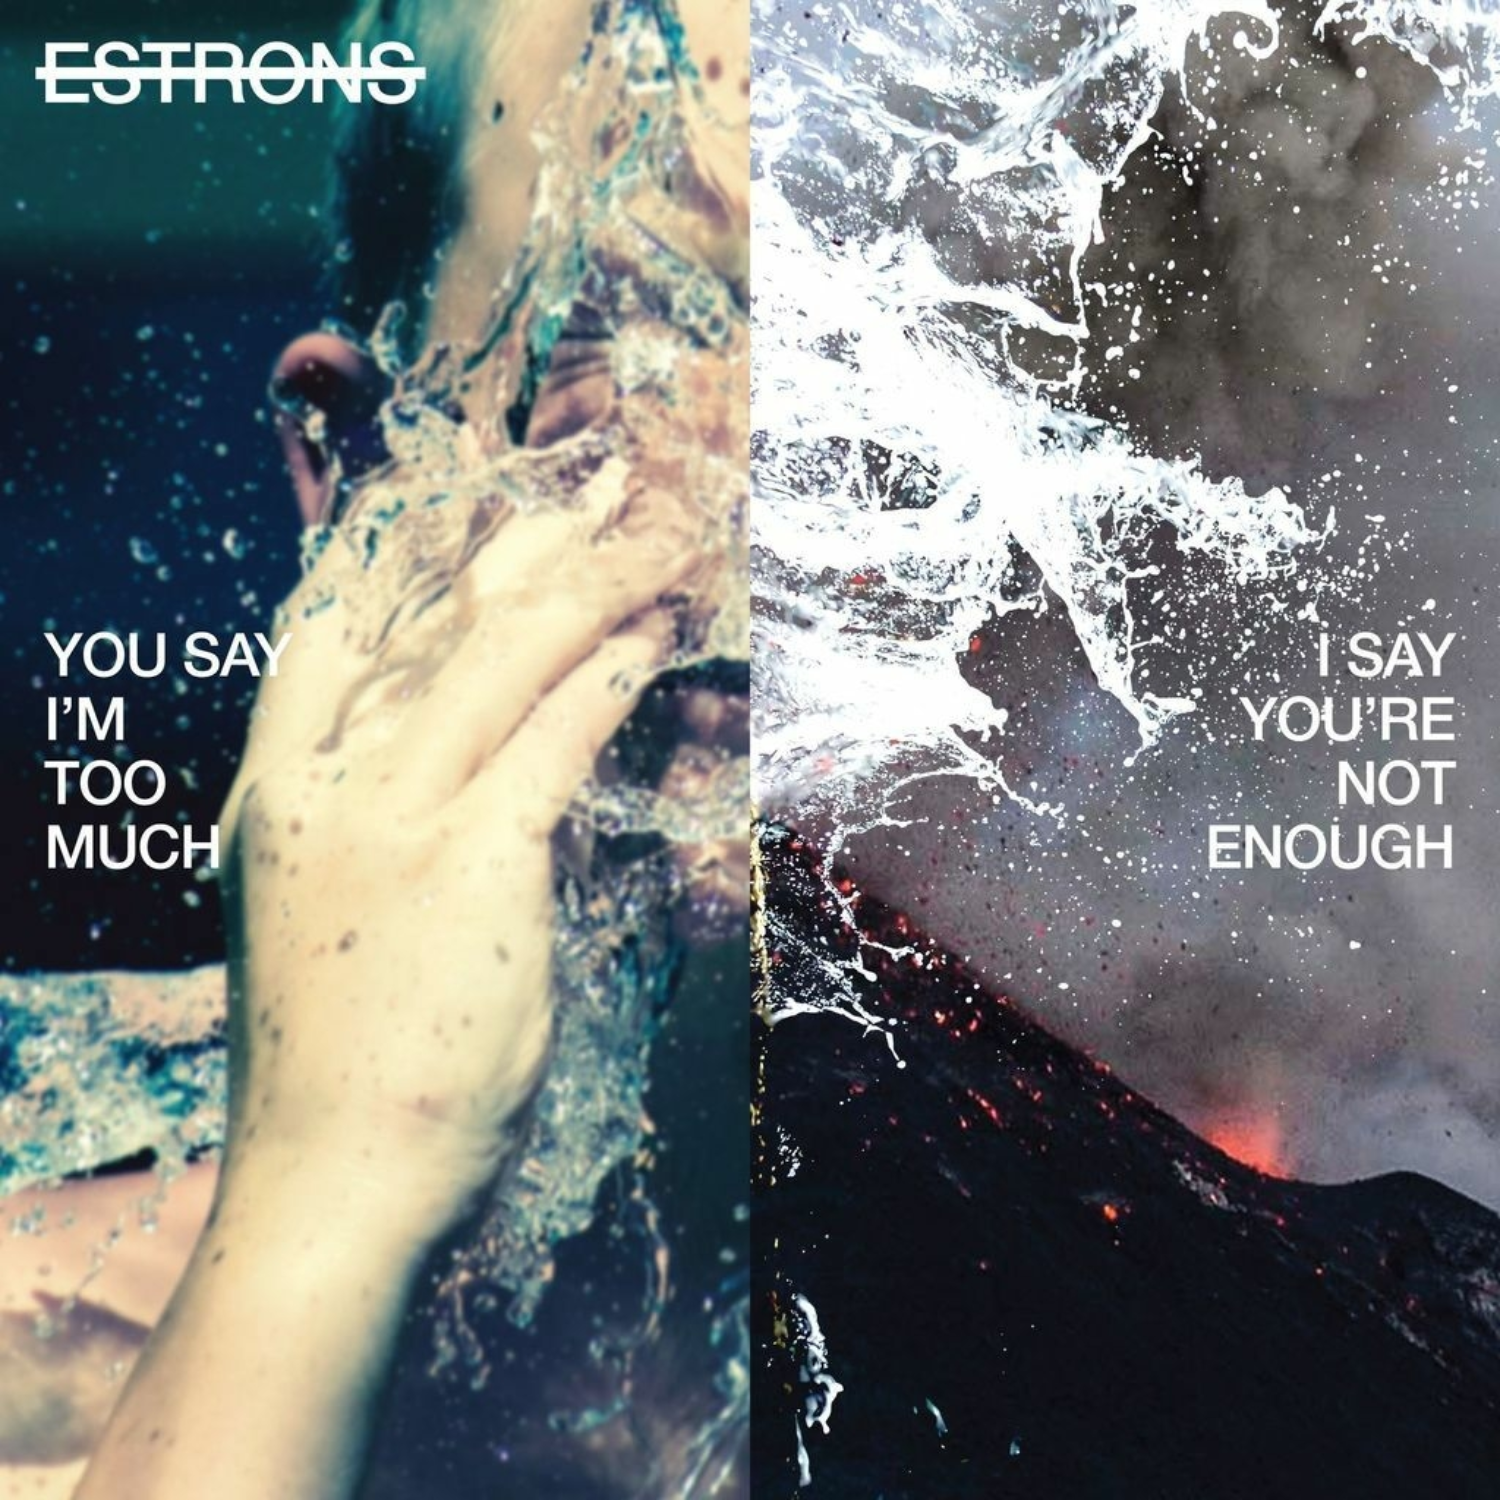 Estrons - You Say I’m Too Much, I Say You’re Not Enough